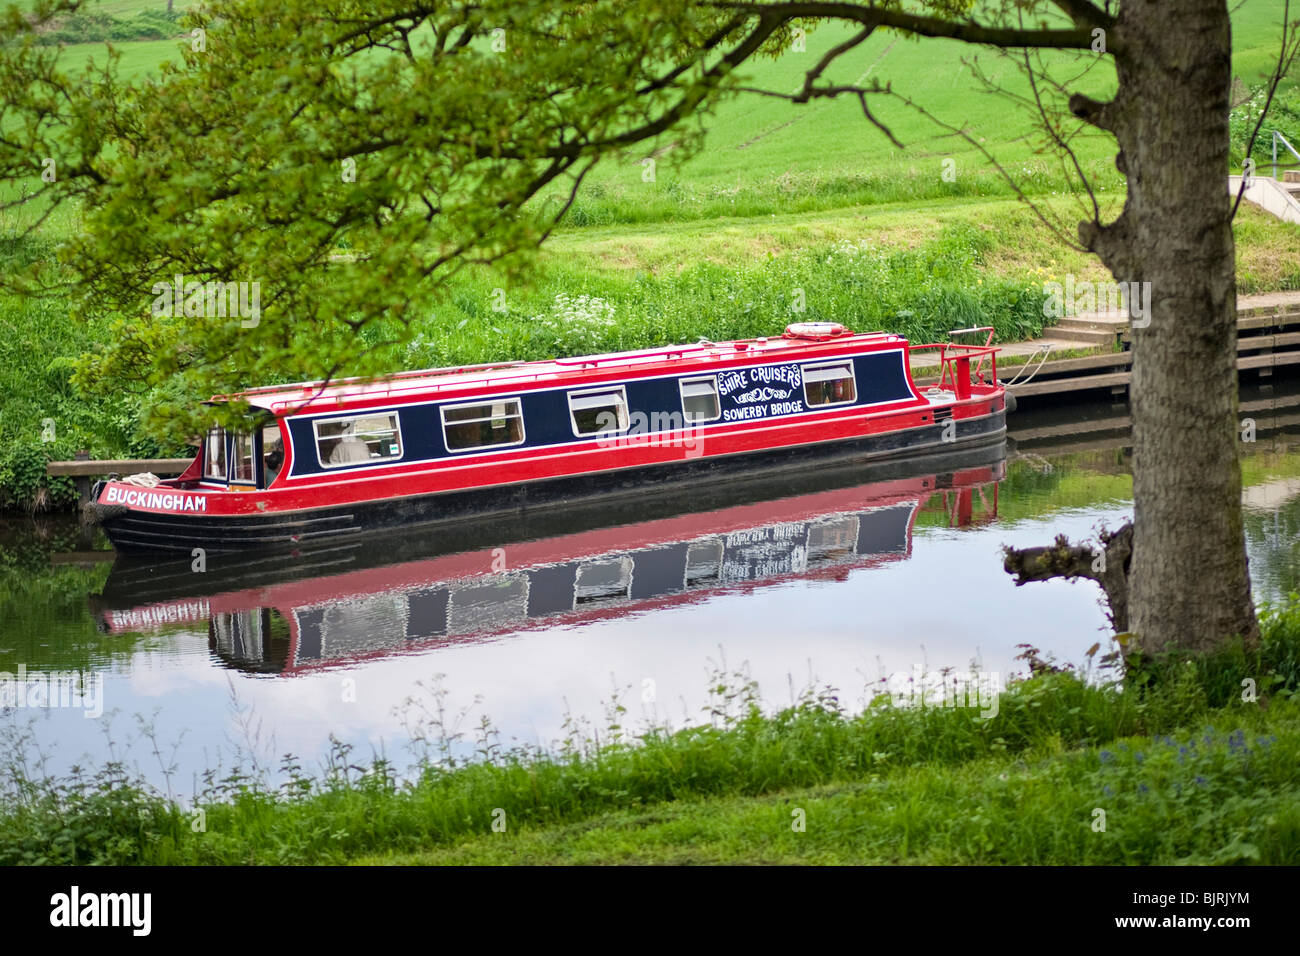 Canal boat uk - barge docked outside a lock on the Huddersfield Narrow Canal, near Huddersfield, West Yorkshire, UK Stock Photo